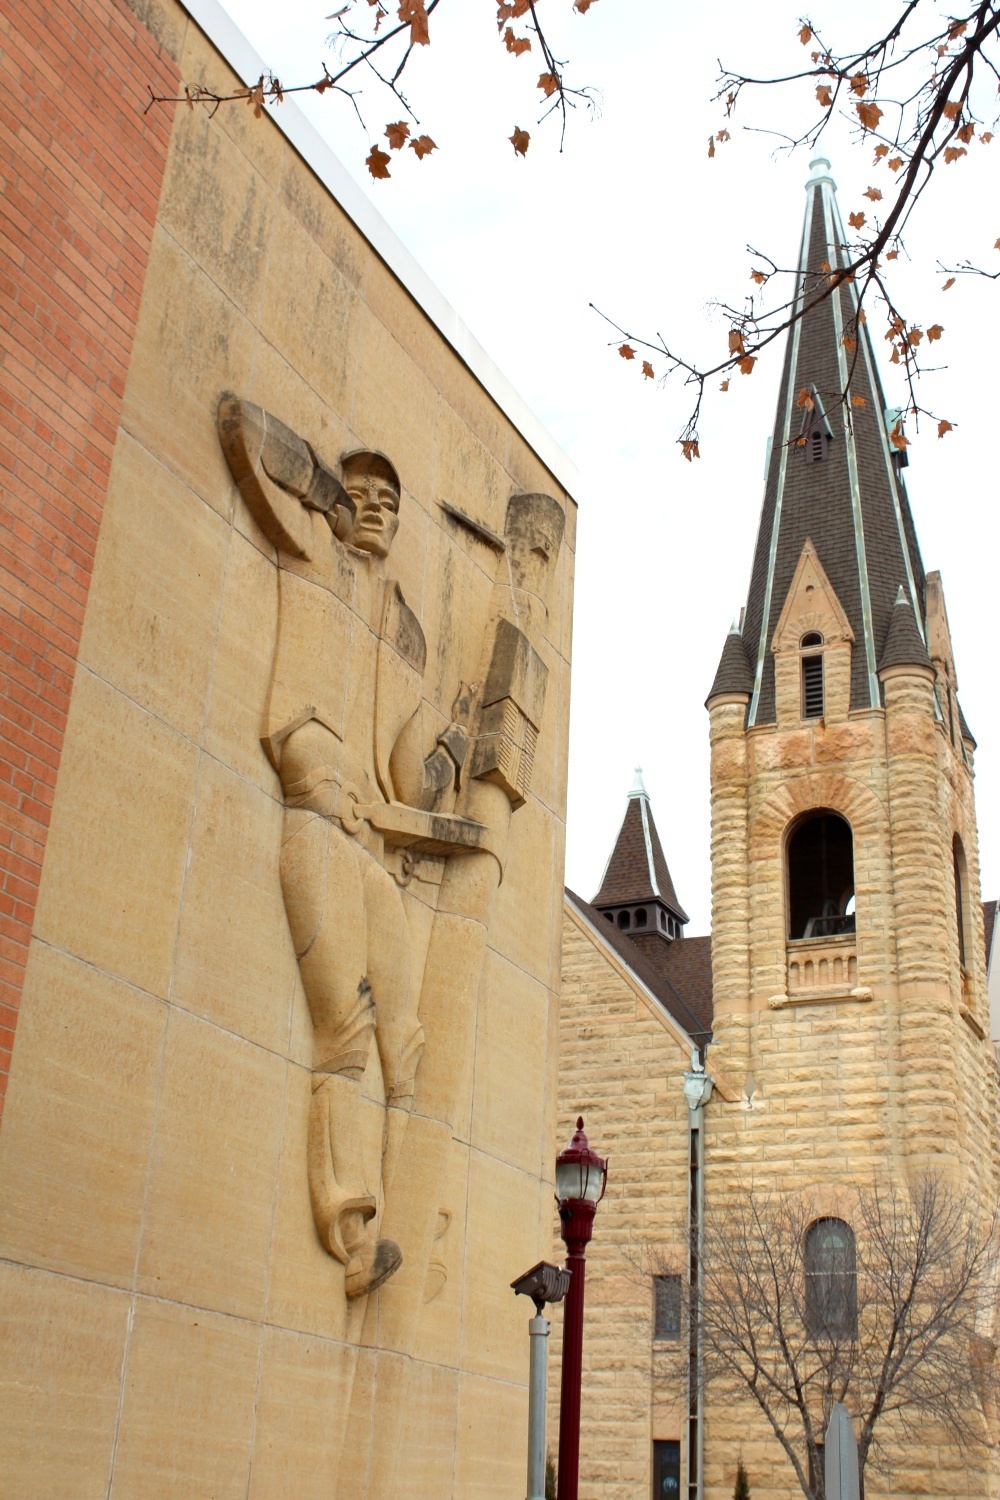 Photo by Mike Lagerquist - The Lineman on the Consolidated Communications building with First Presbyterian Church in the background at the corners of S Broad and E Hickory Streets in Mankto